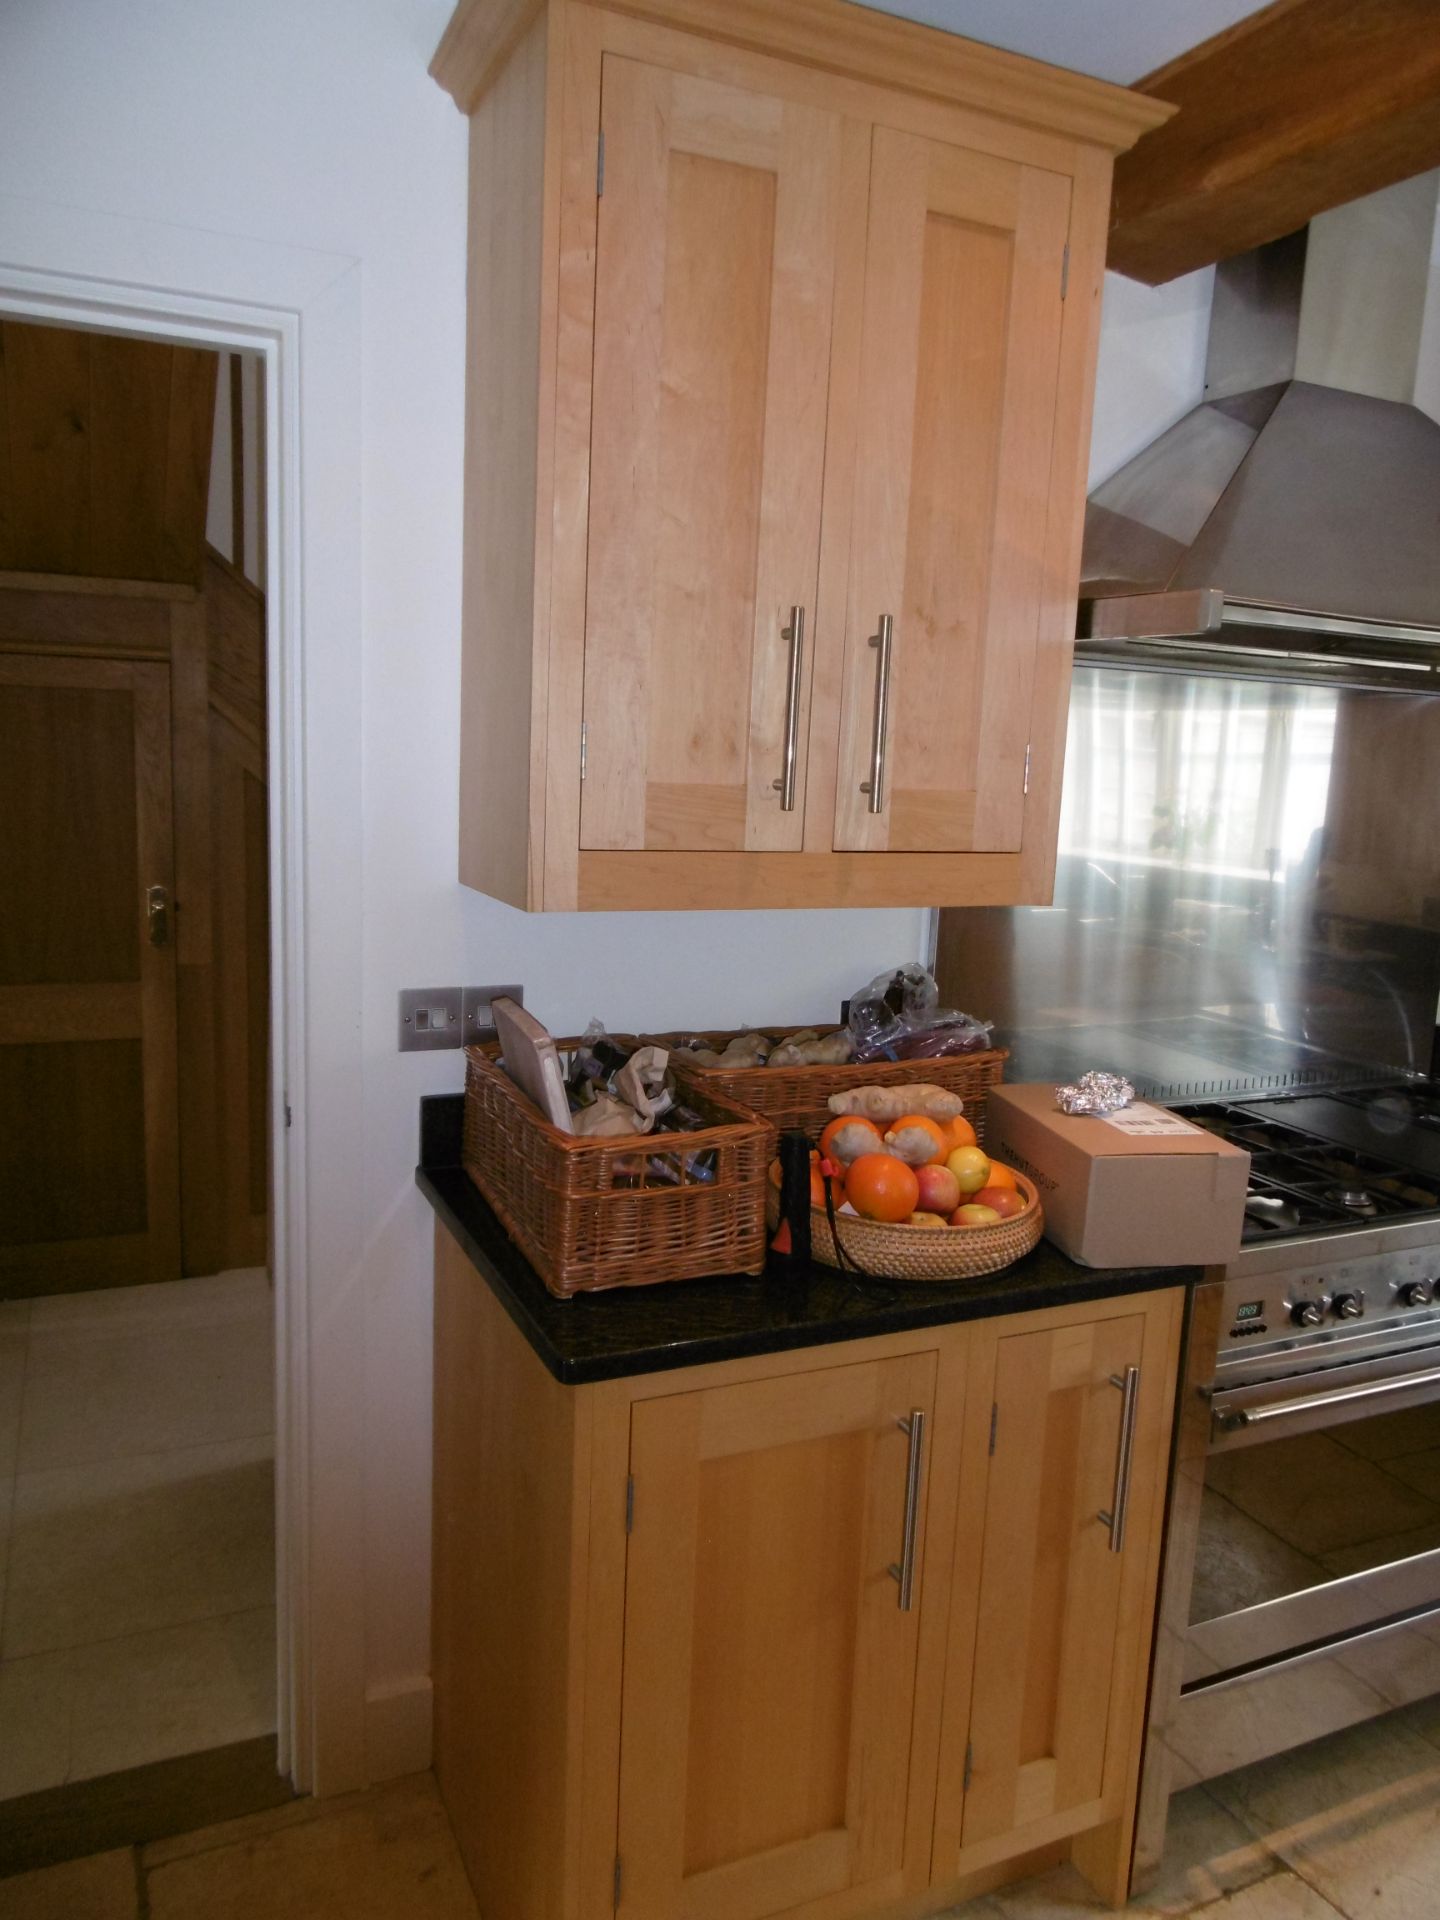 Luxury Used Maple Kitchen with Appliances including Range Cooker - Image 3 of 5